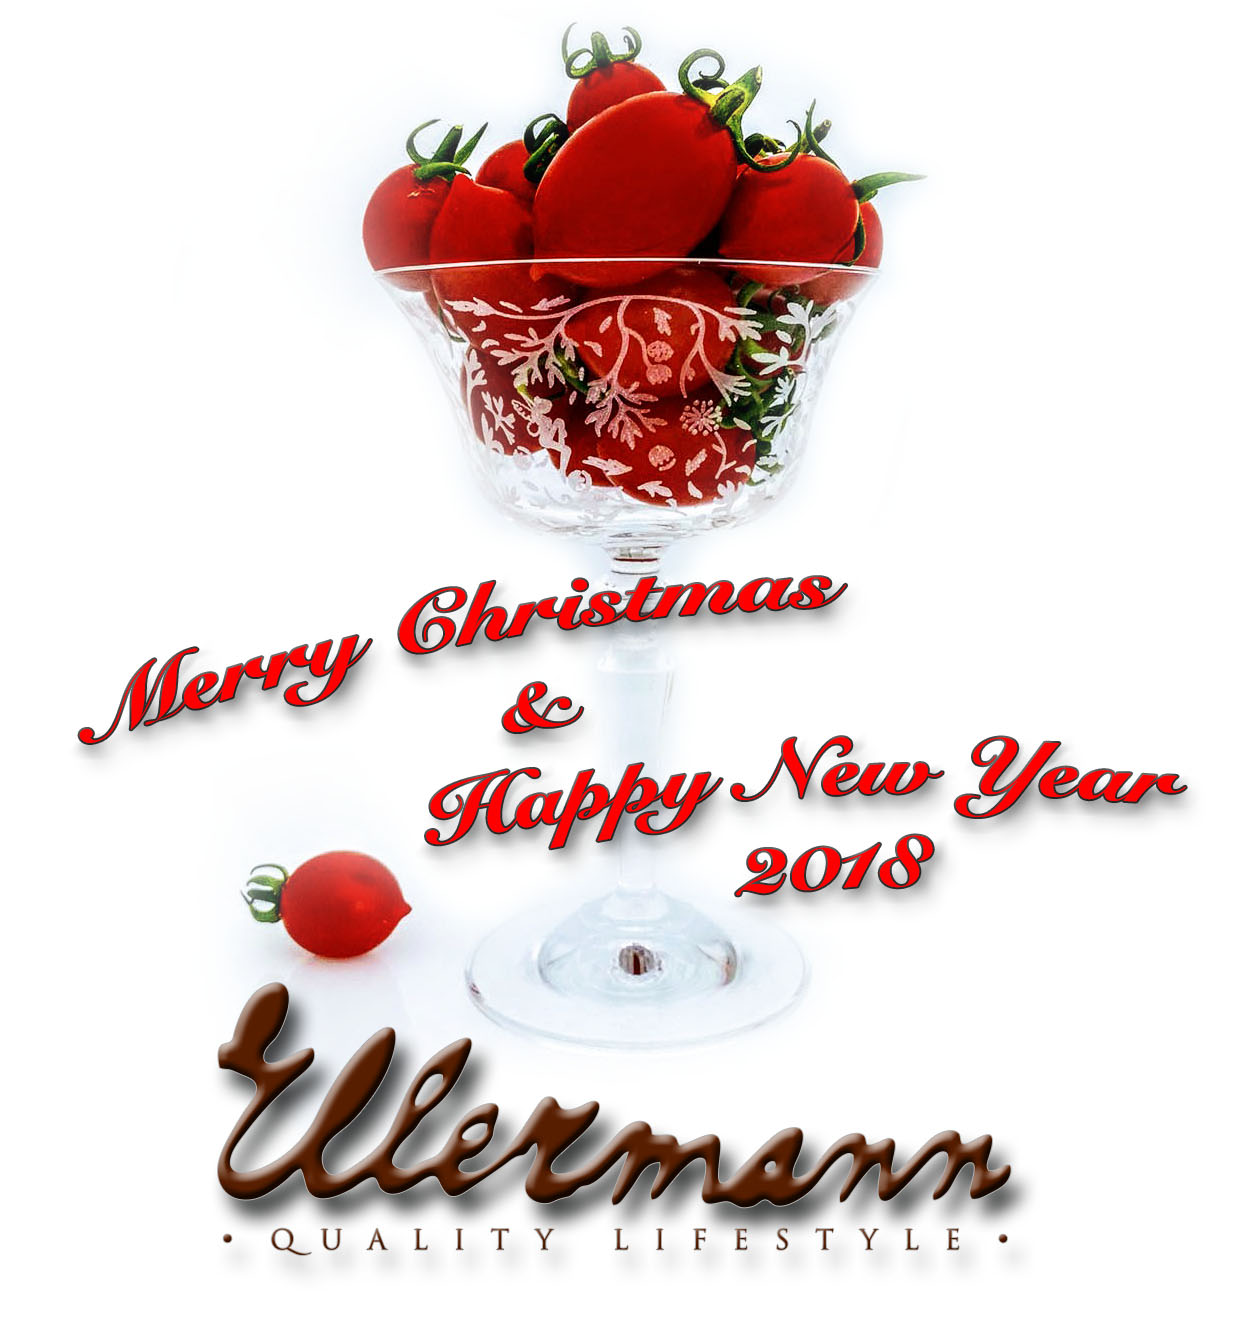 Merry Christmas & Happy New Year 2018 from Ellermann